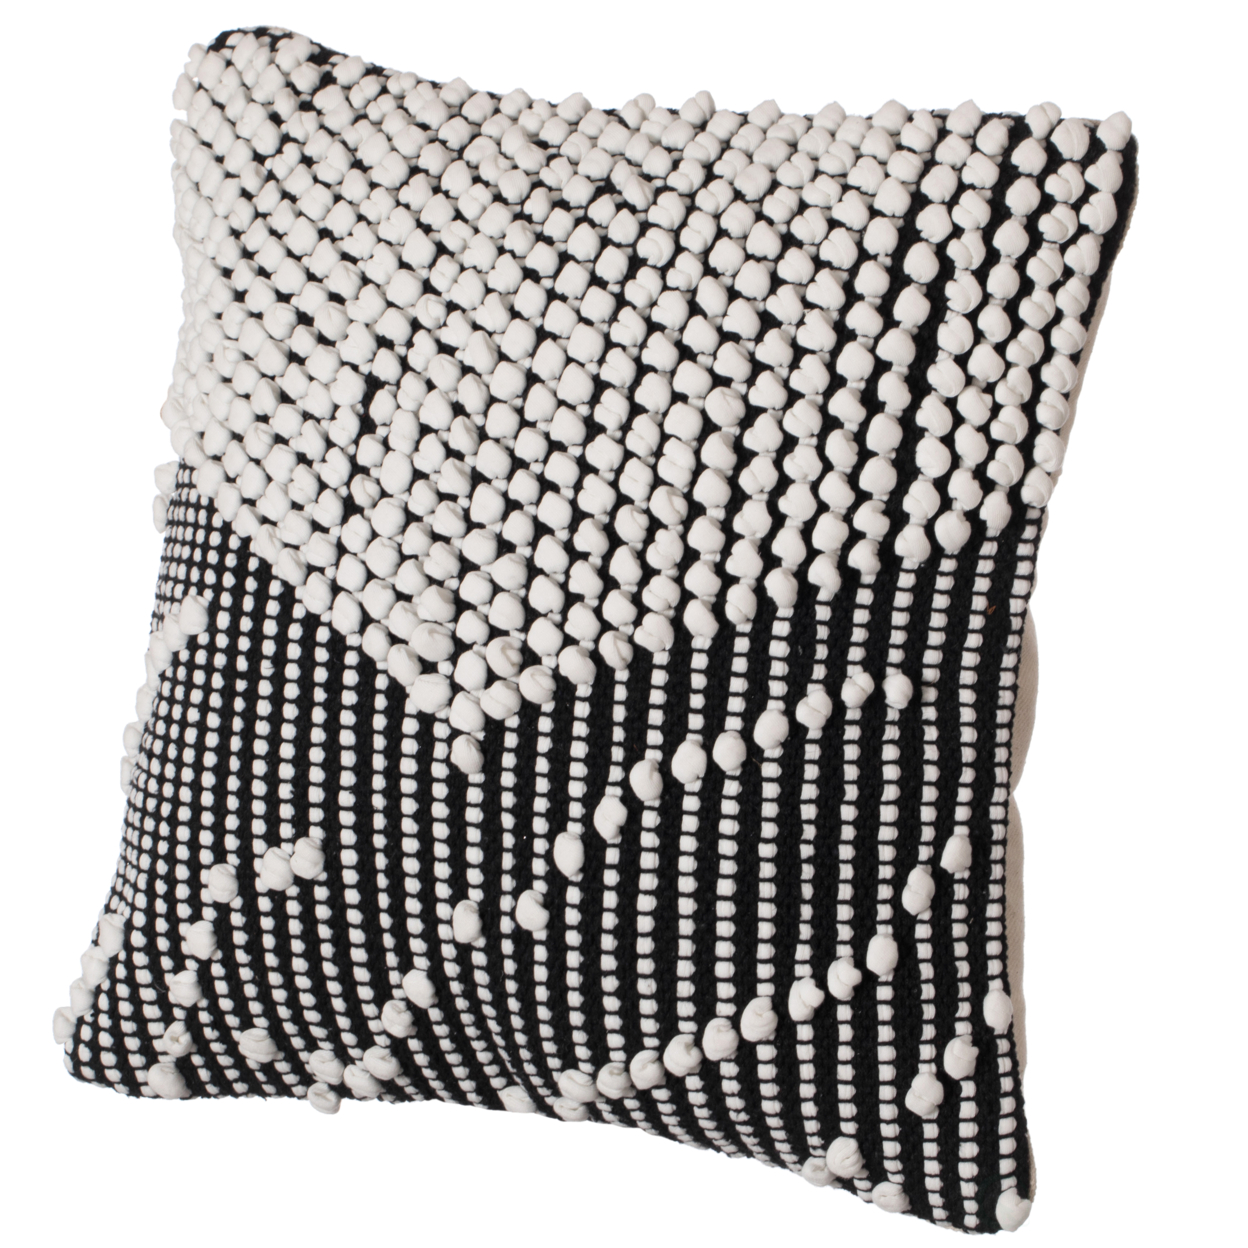 16 Decorative Handwoven Cotton Throw Pillow Cover With Embossed Dots - Black